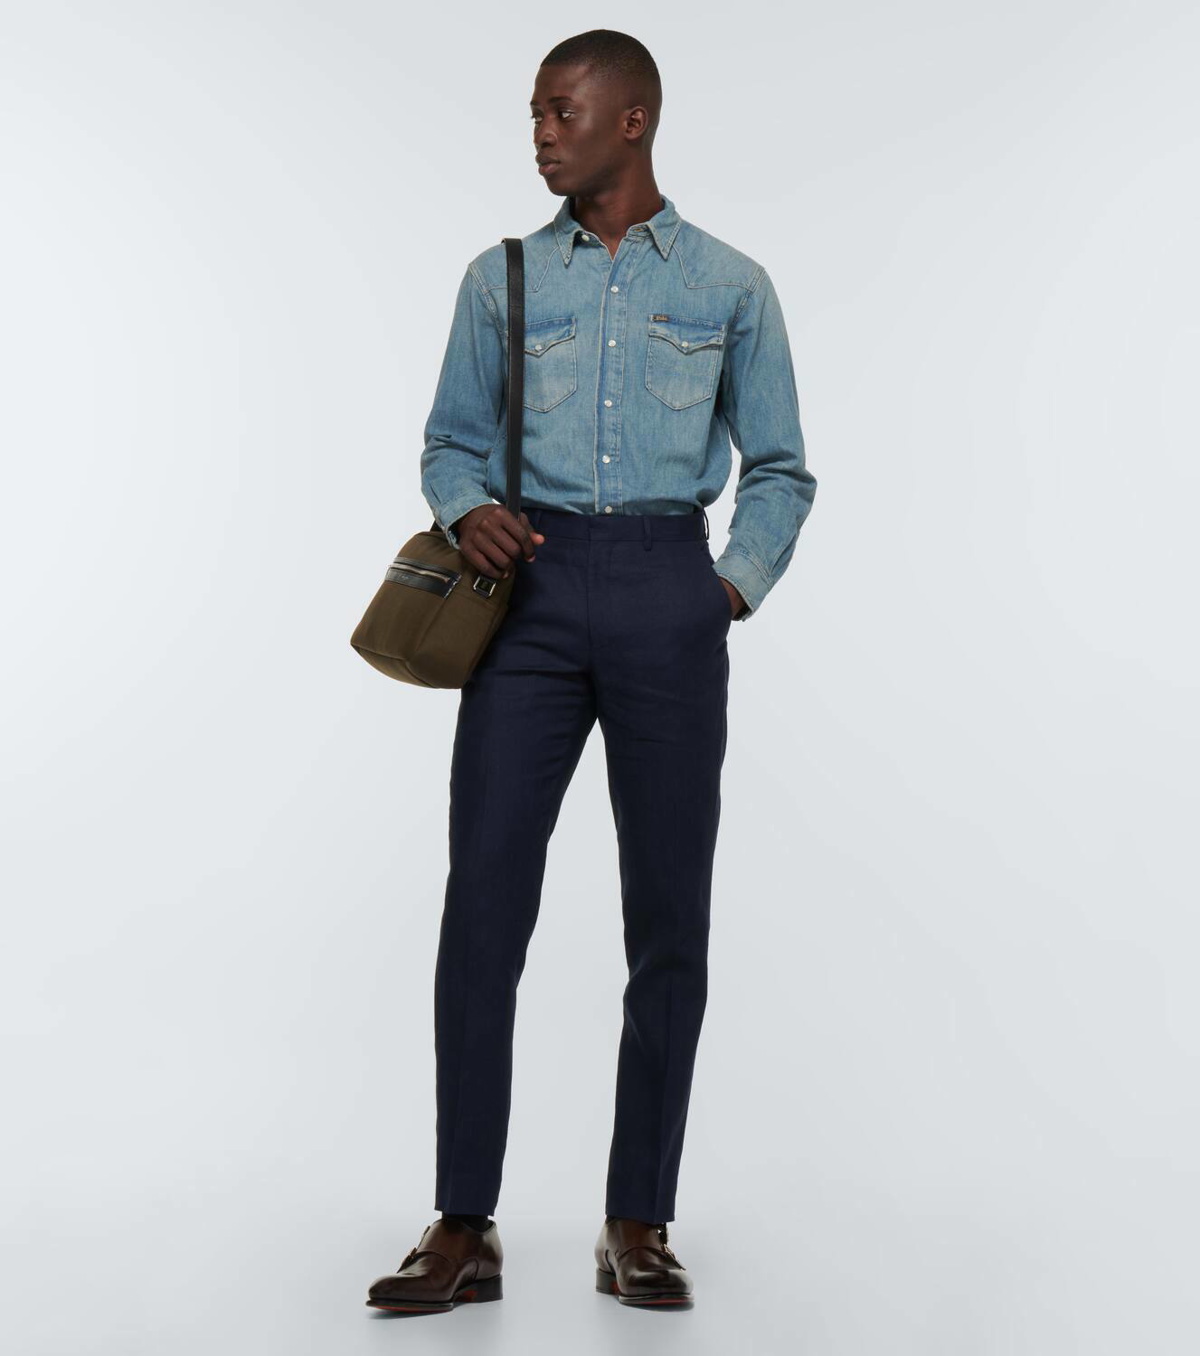 Black Chinos with Denim Shirt Outfits (68 ideas & outfits) | Lookastic